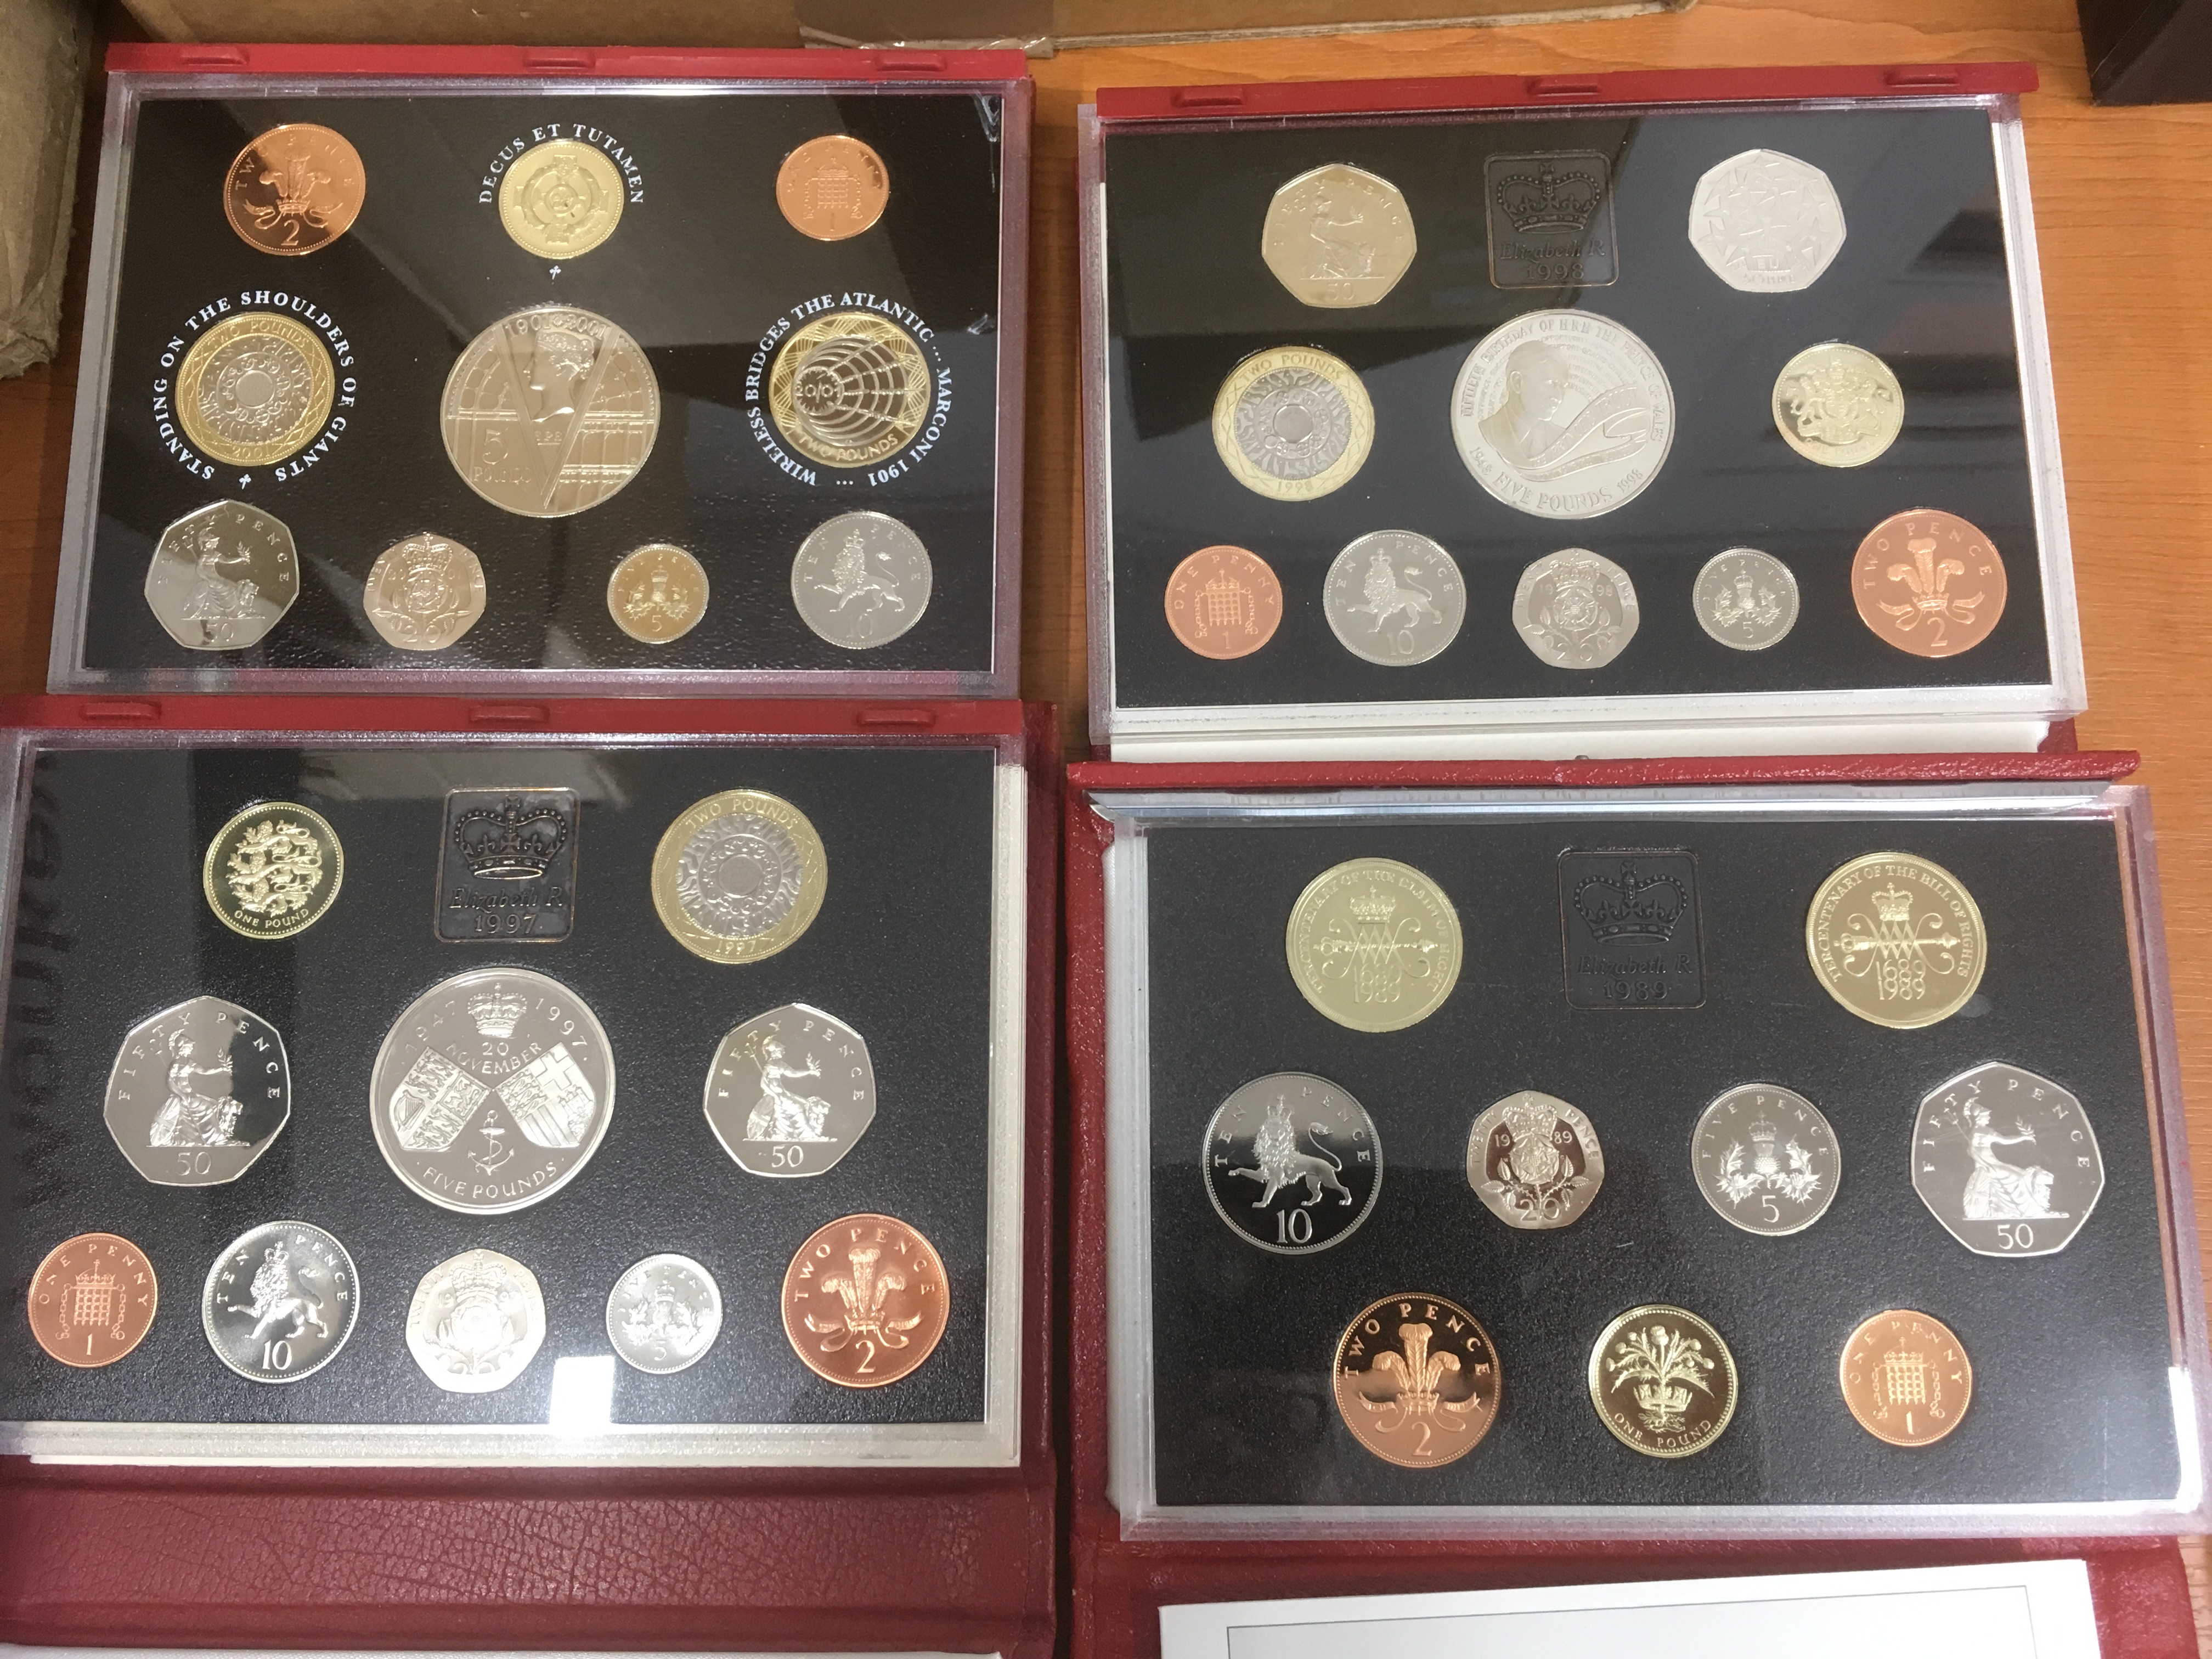 GB COINS: SMALL BOX PROOF SETS WITH 1970 (2), 1971 (3), 1981, 1989 DX, 1997 DX,